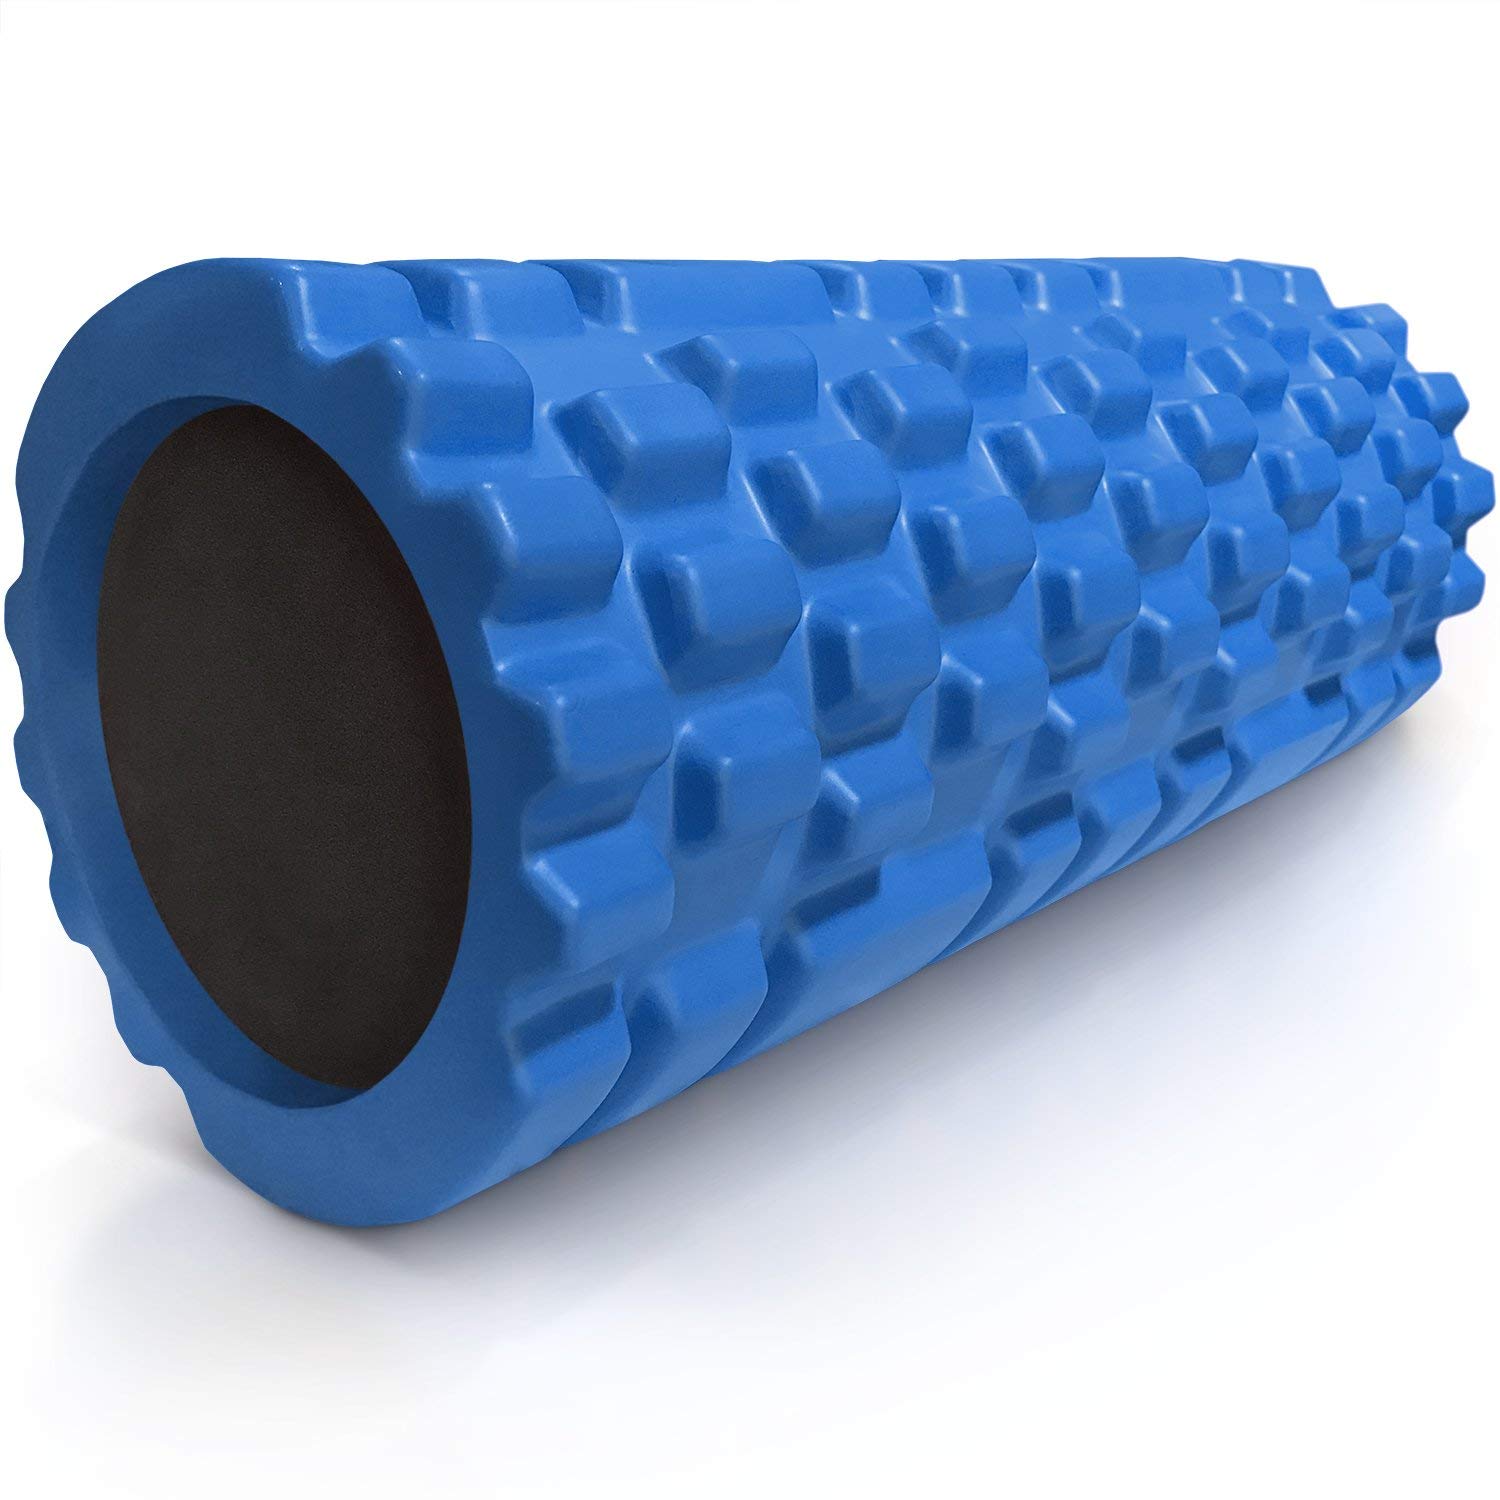 321 STRONG Foam Roller - Medium Density Deep Tissue Massager for Muscle Massage and Myofascial Trigger Point Release, with 4K eB